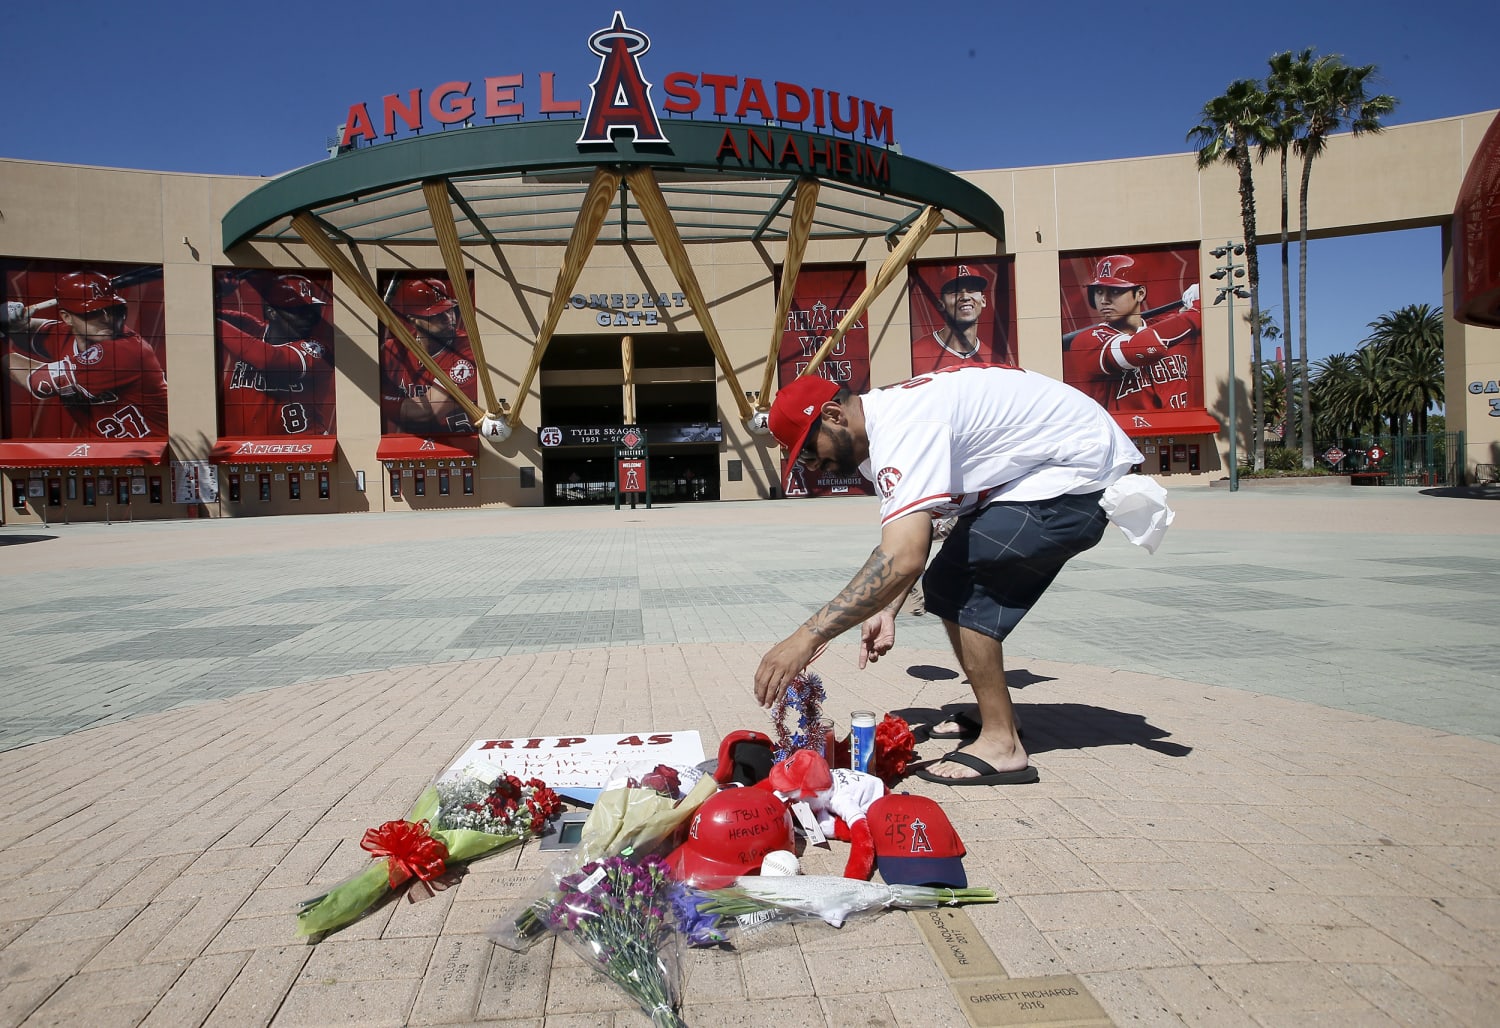 Tyler Skaggs dead: Police refuse to confirm cause of death of LA Angels  pitcher but say 'no foul play is suspected', The Independent